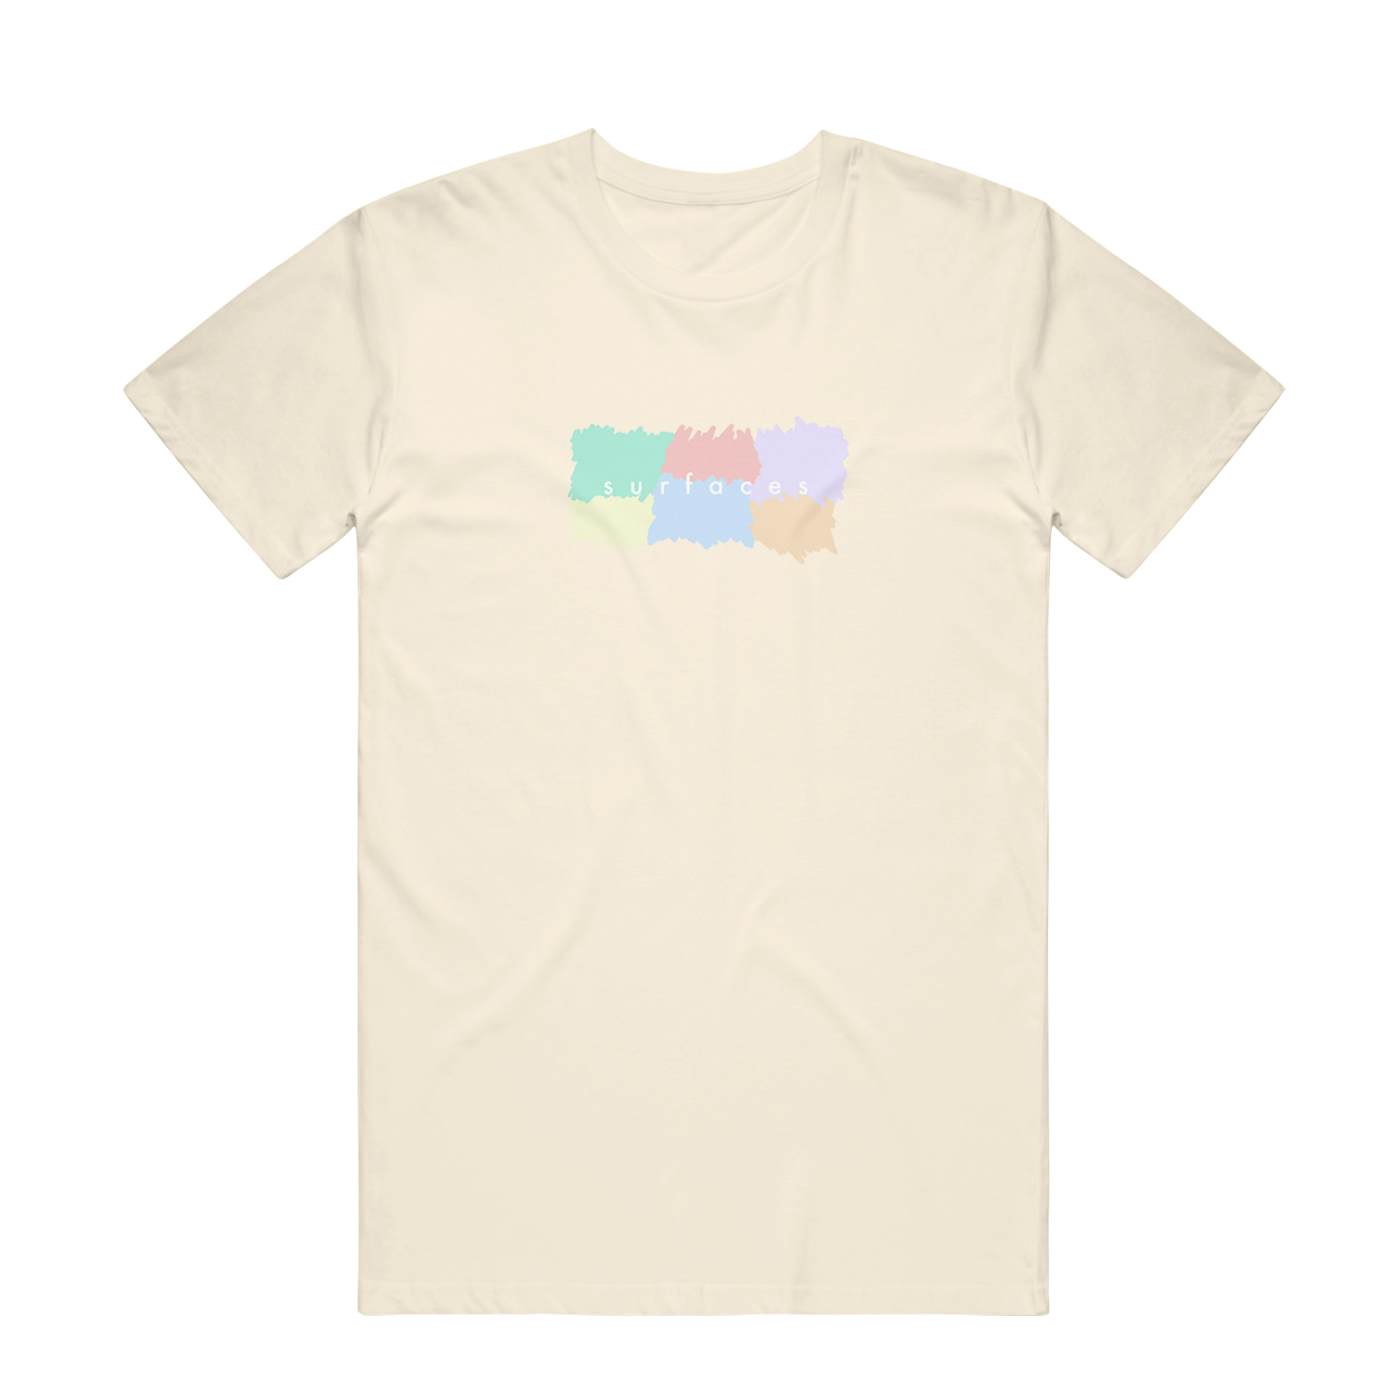 Surfaces Paint Tee